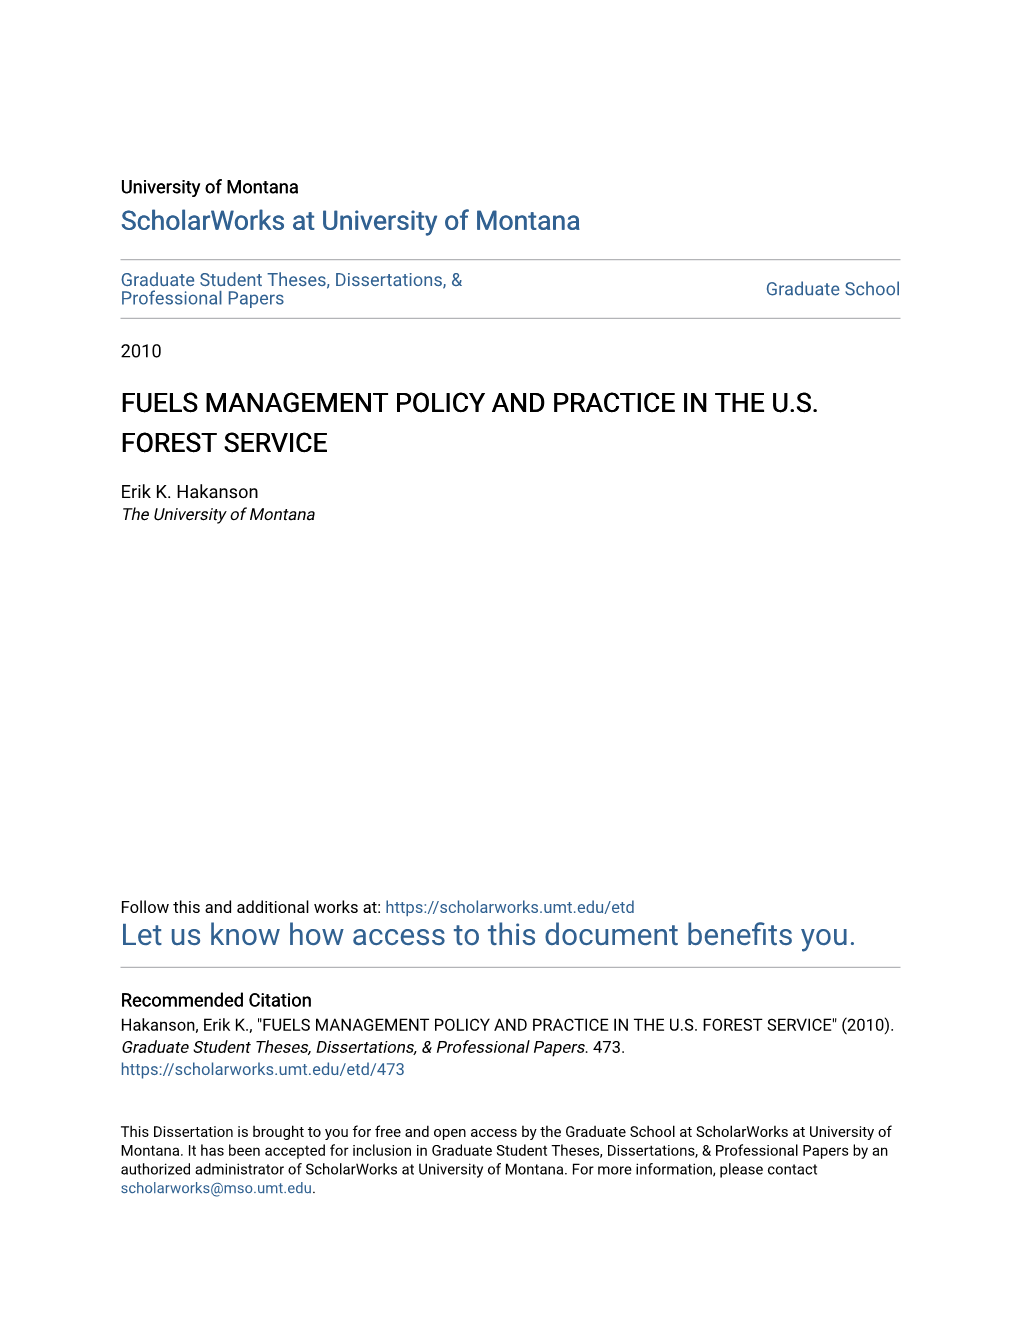 Fuels Management Policy and Practice in the U.S. Forest Service